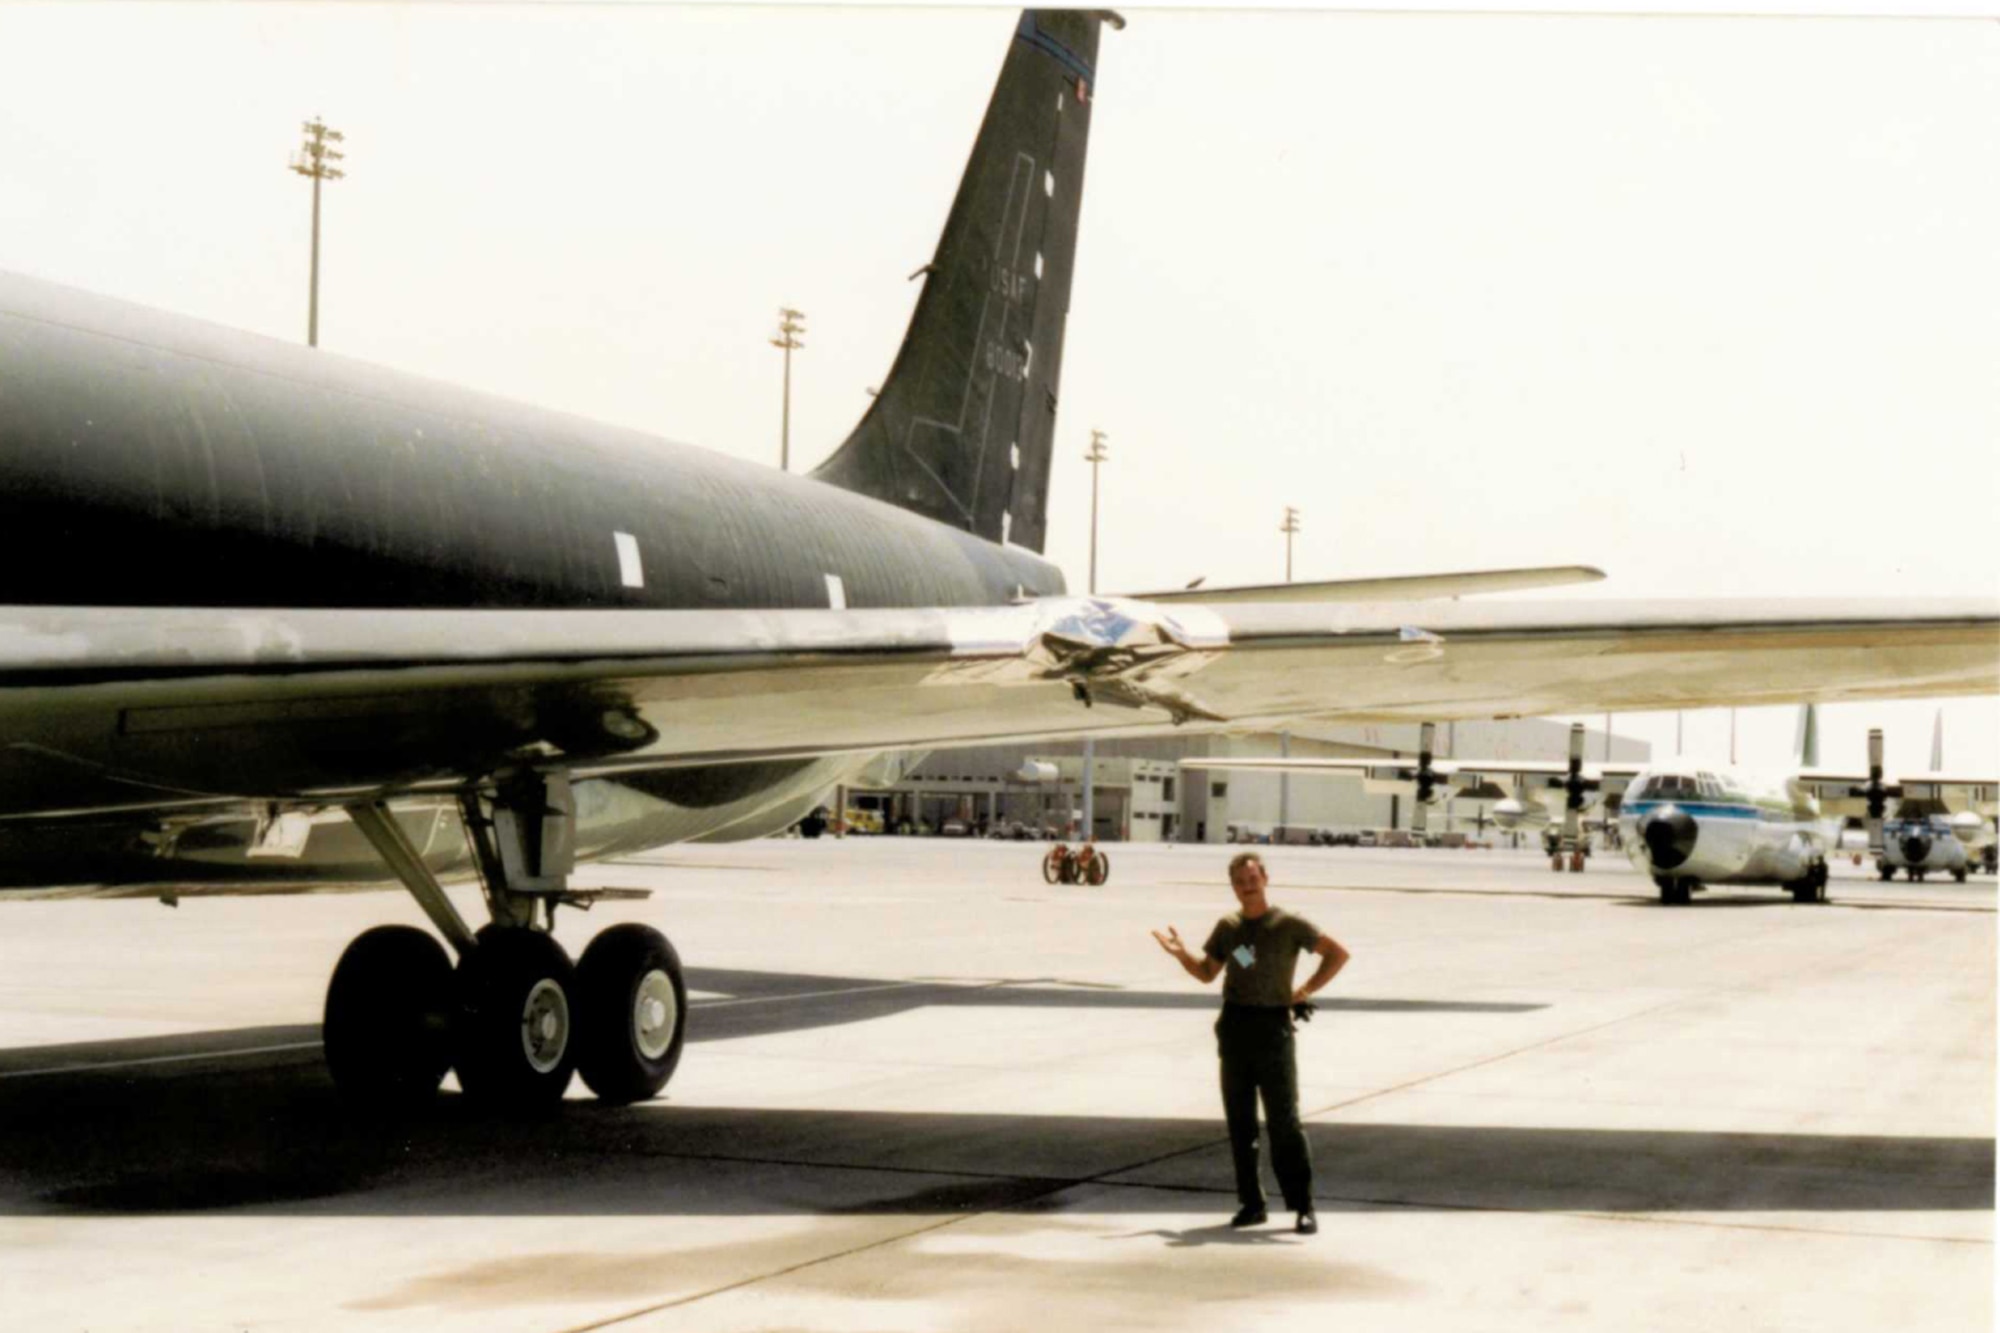 Tech. Sgt. Tim Hill stands next to his KC-135 Stratotanker aircraft 58-0013 in Saudi Arabia during Desert Storm. Two of the aircraft's engines departed the aircraft following severe turbulence but was landed safely by the Kansas crew members. (U.S. Air Force photo/courtesy Tim Hill)